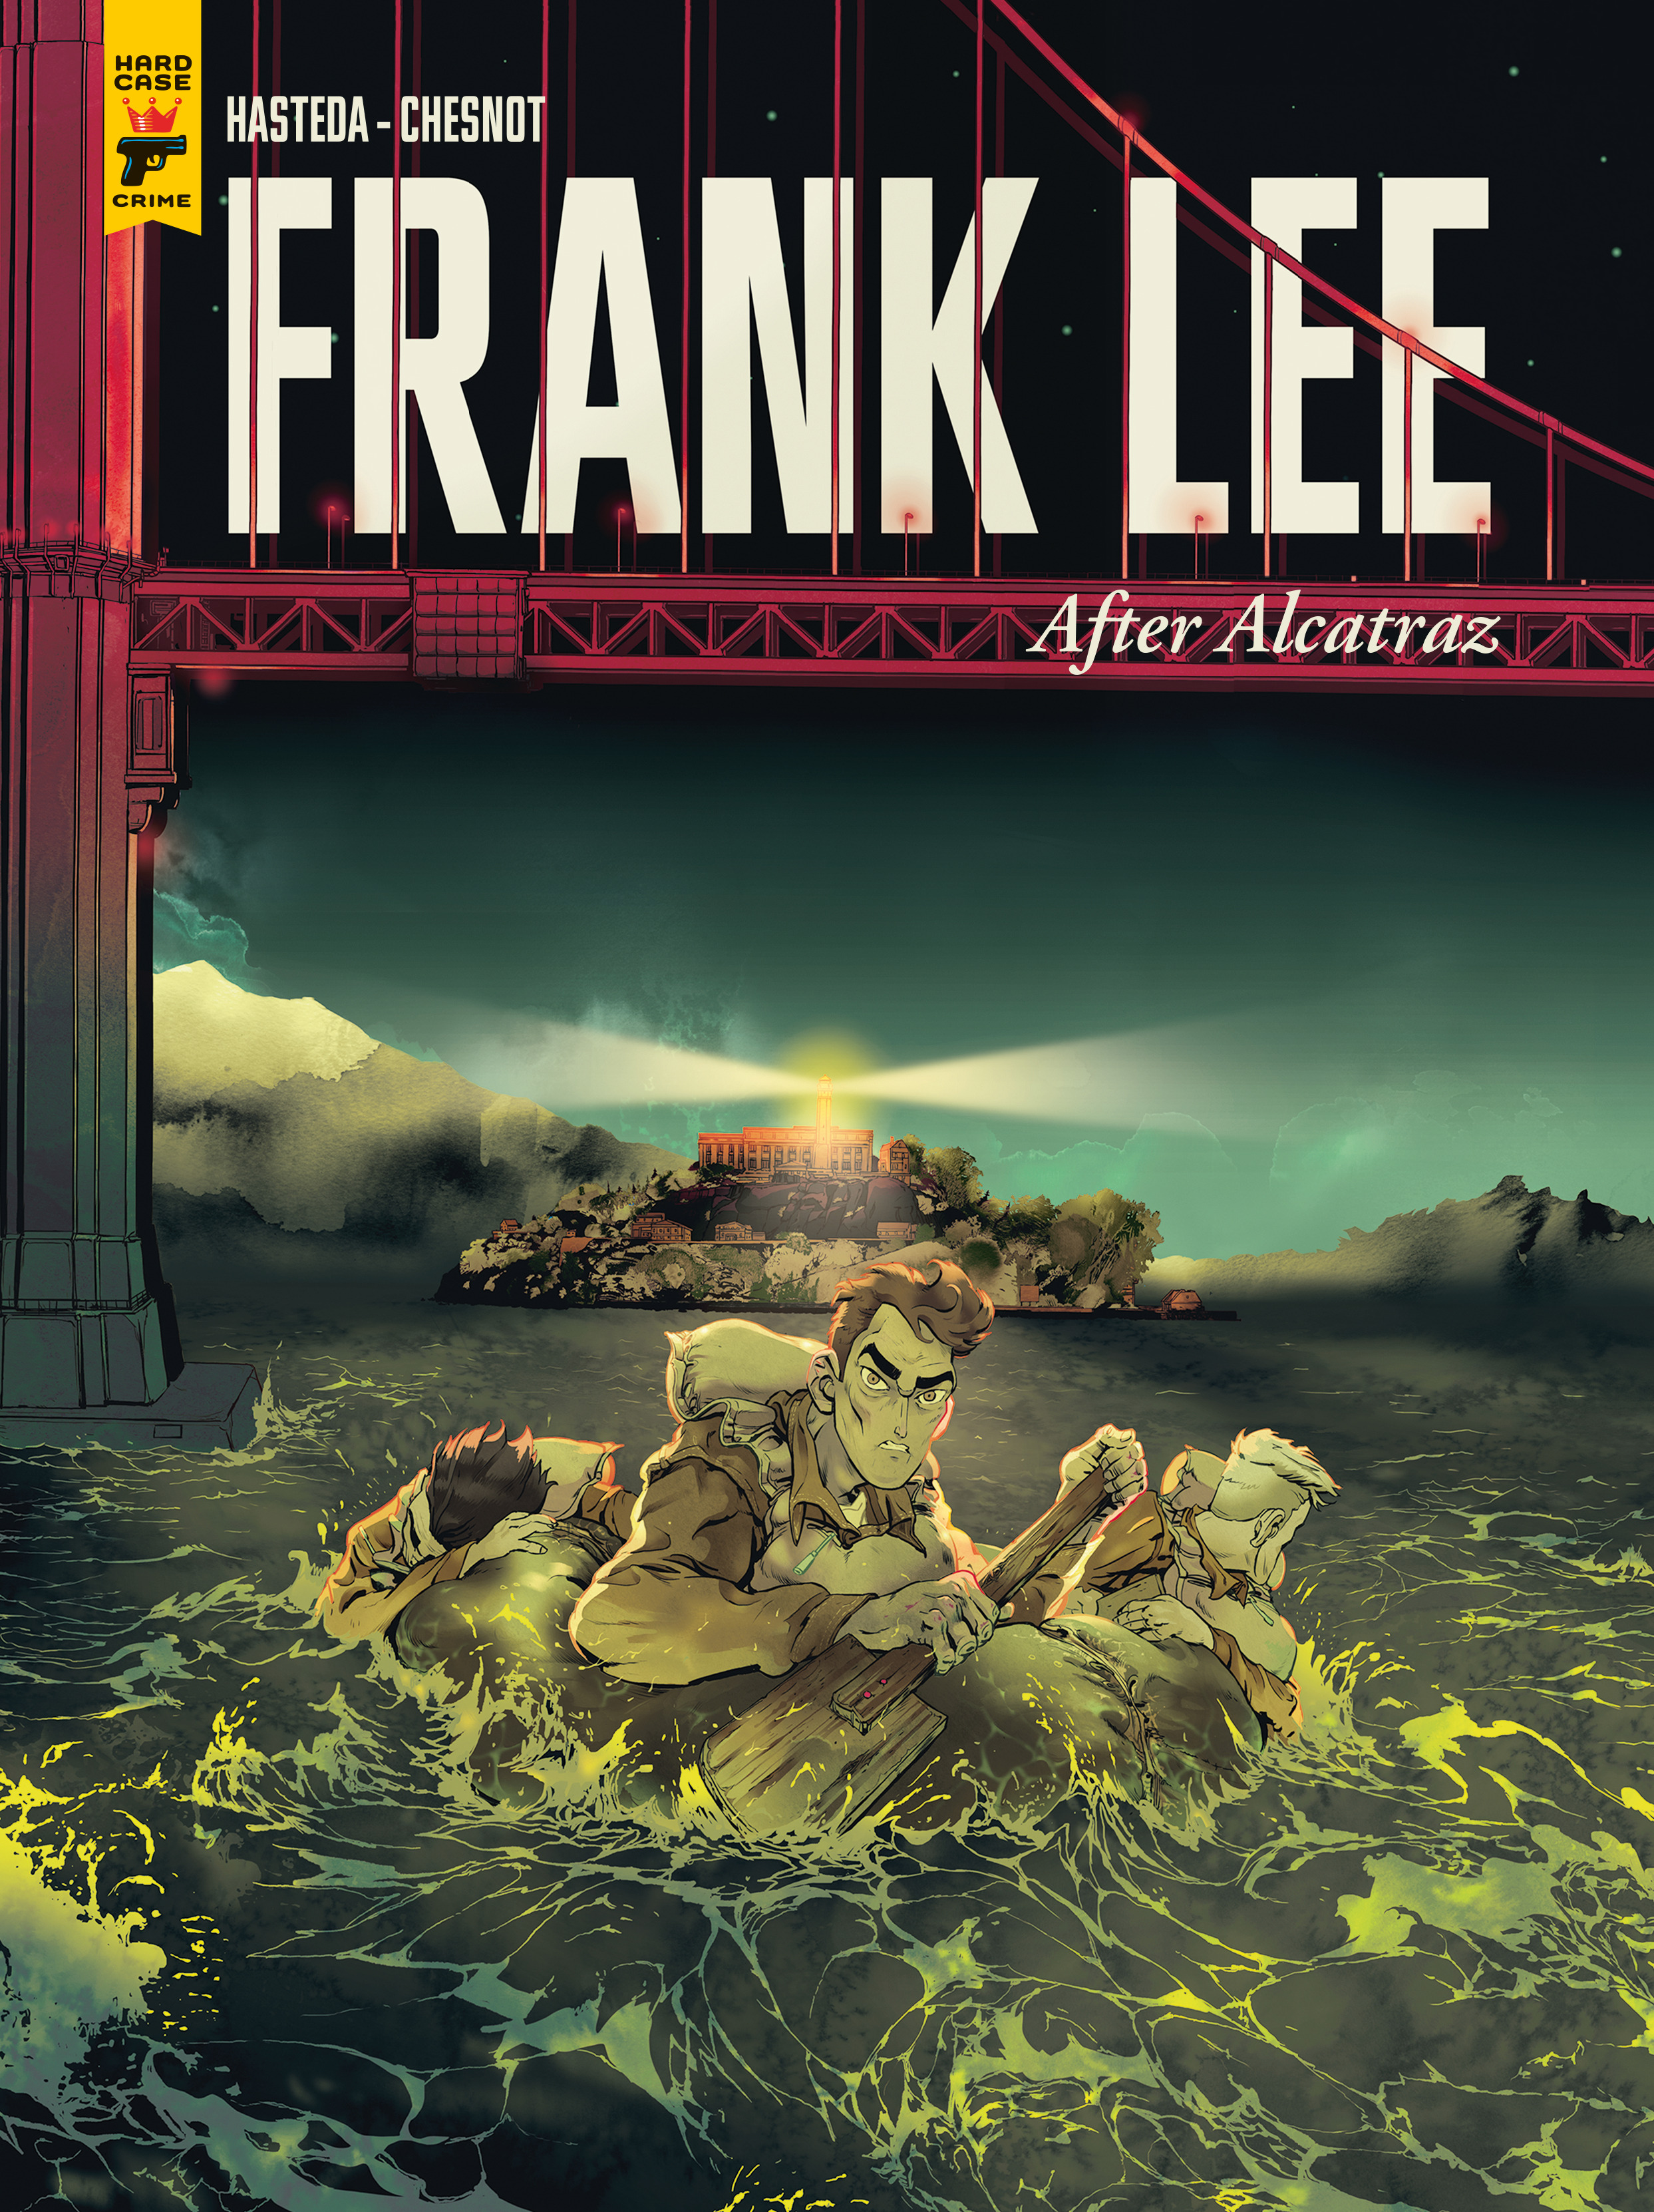 Read online Frank Lee: After Alcatraz comic -  Issue # TPB - 1